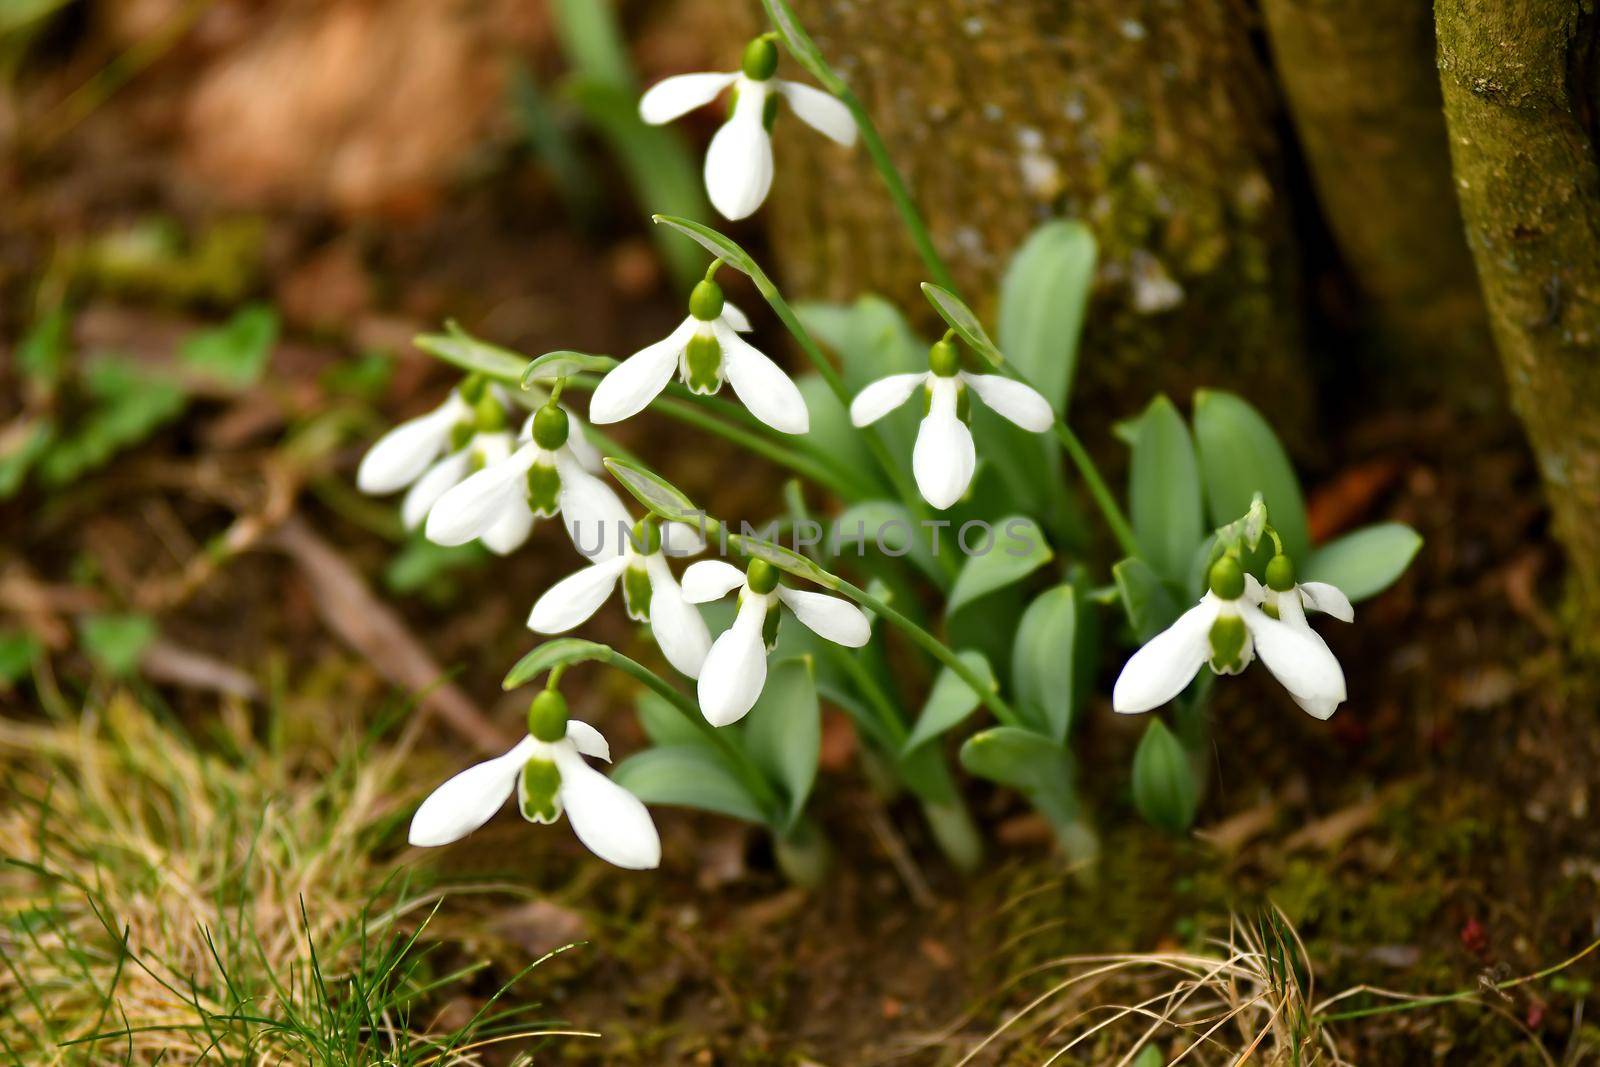 snowdrops in early spring in a German garden